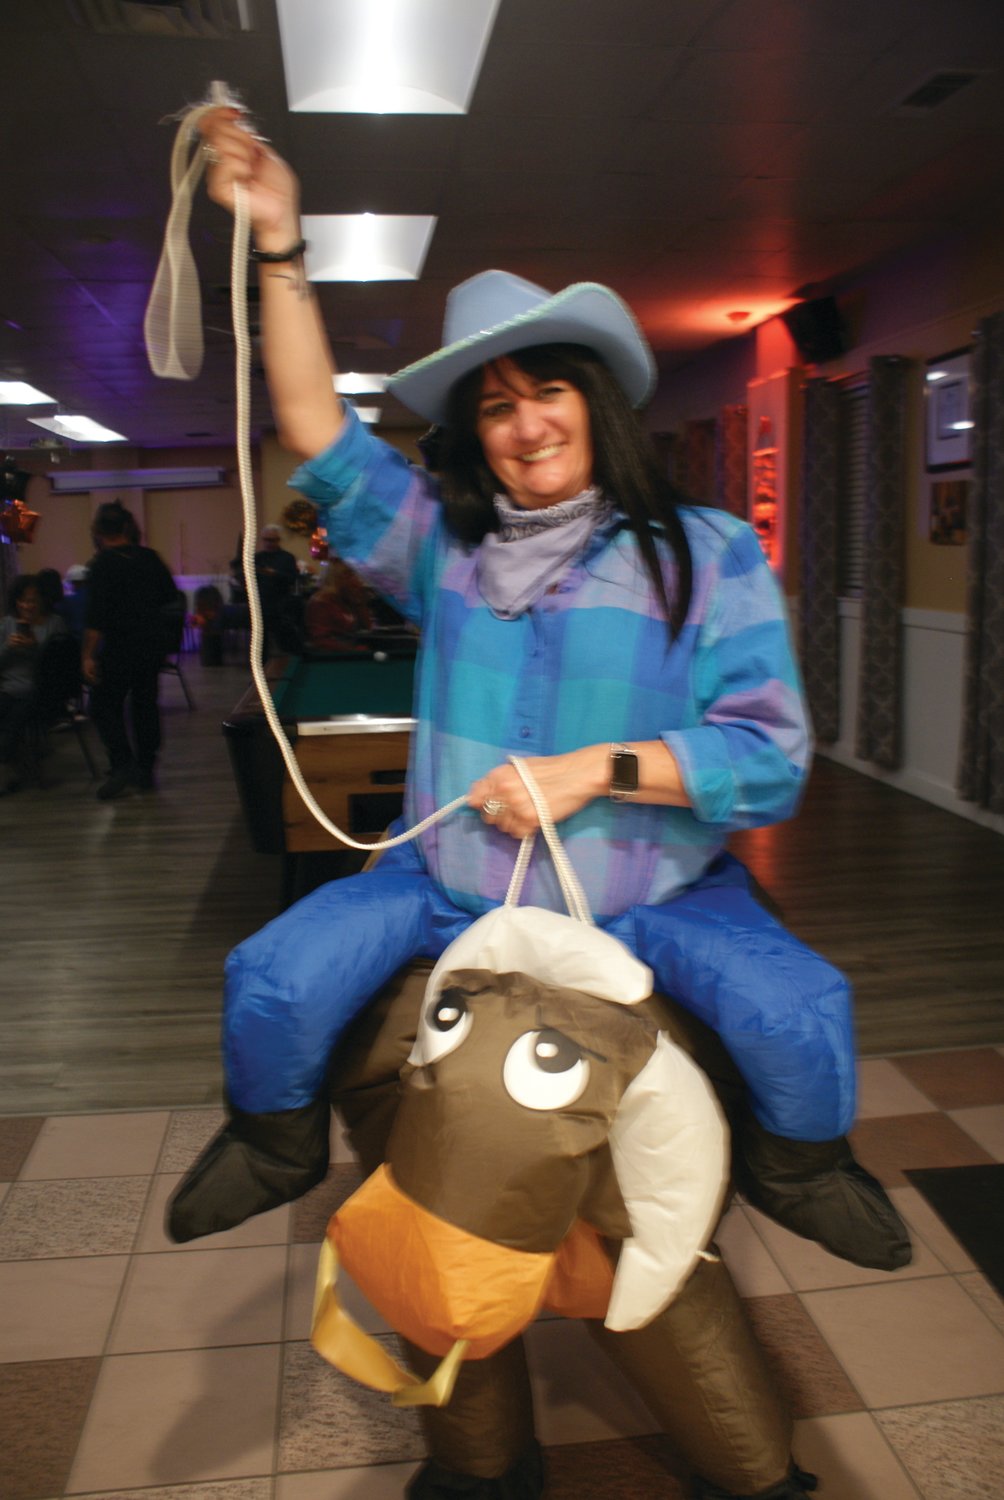 RODEO!  Riding the costume bull was Dawn Vittorioso during the St. Mary’s Feast Society Halloween Party this past weekend.